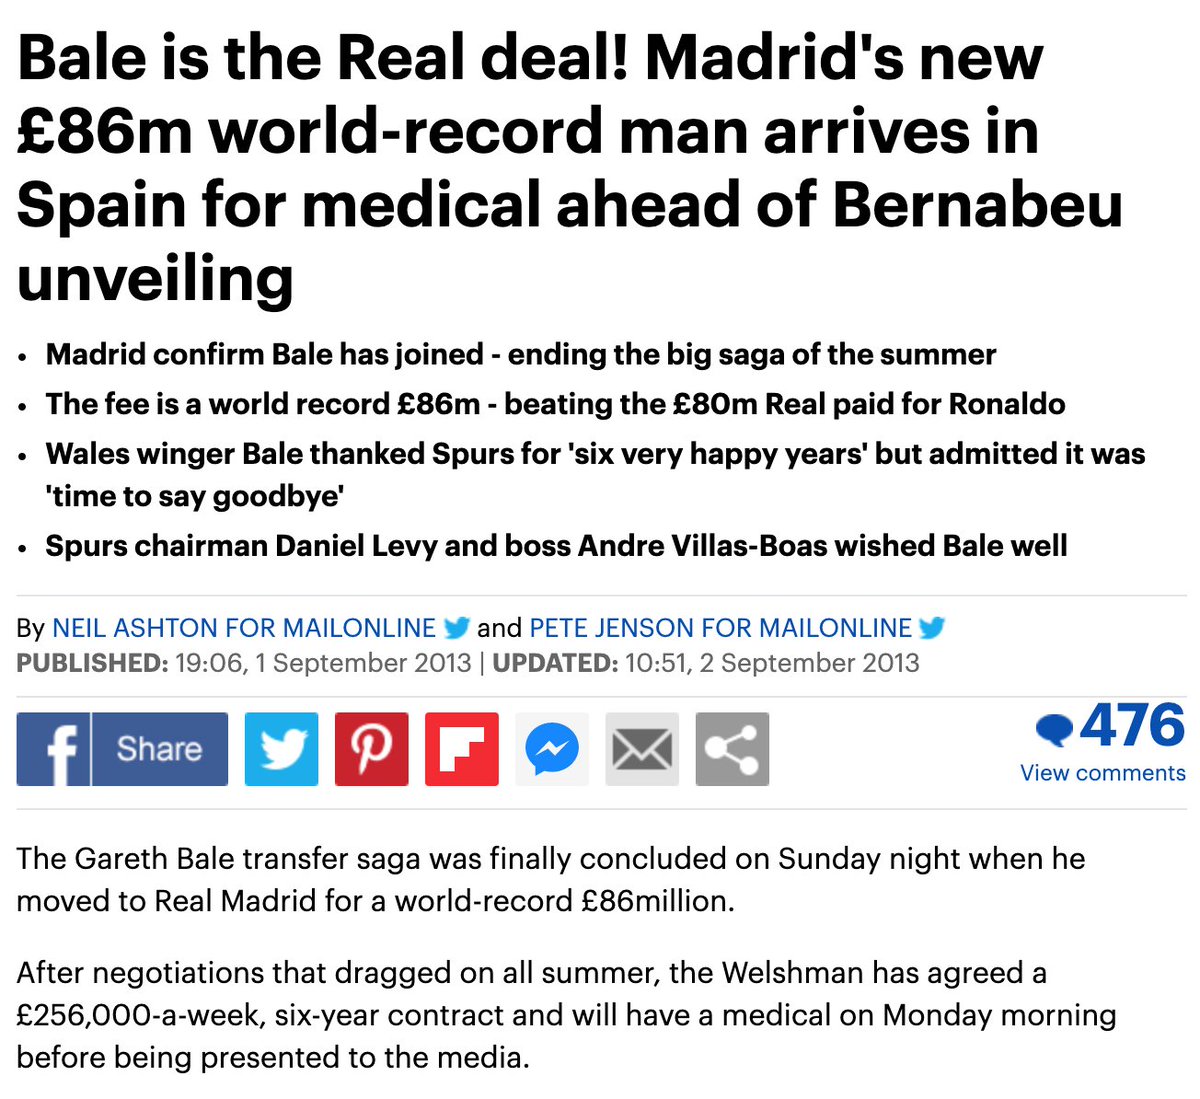 Three days later, United upped their bid for Fellaini and Baines to £36m, which was again rejected. Bale signed for Real Madrid. On deadline day we bid £40m for Sami Khedira and that was also rejected.